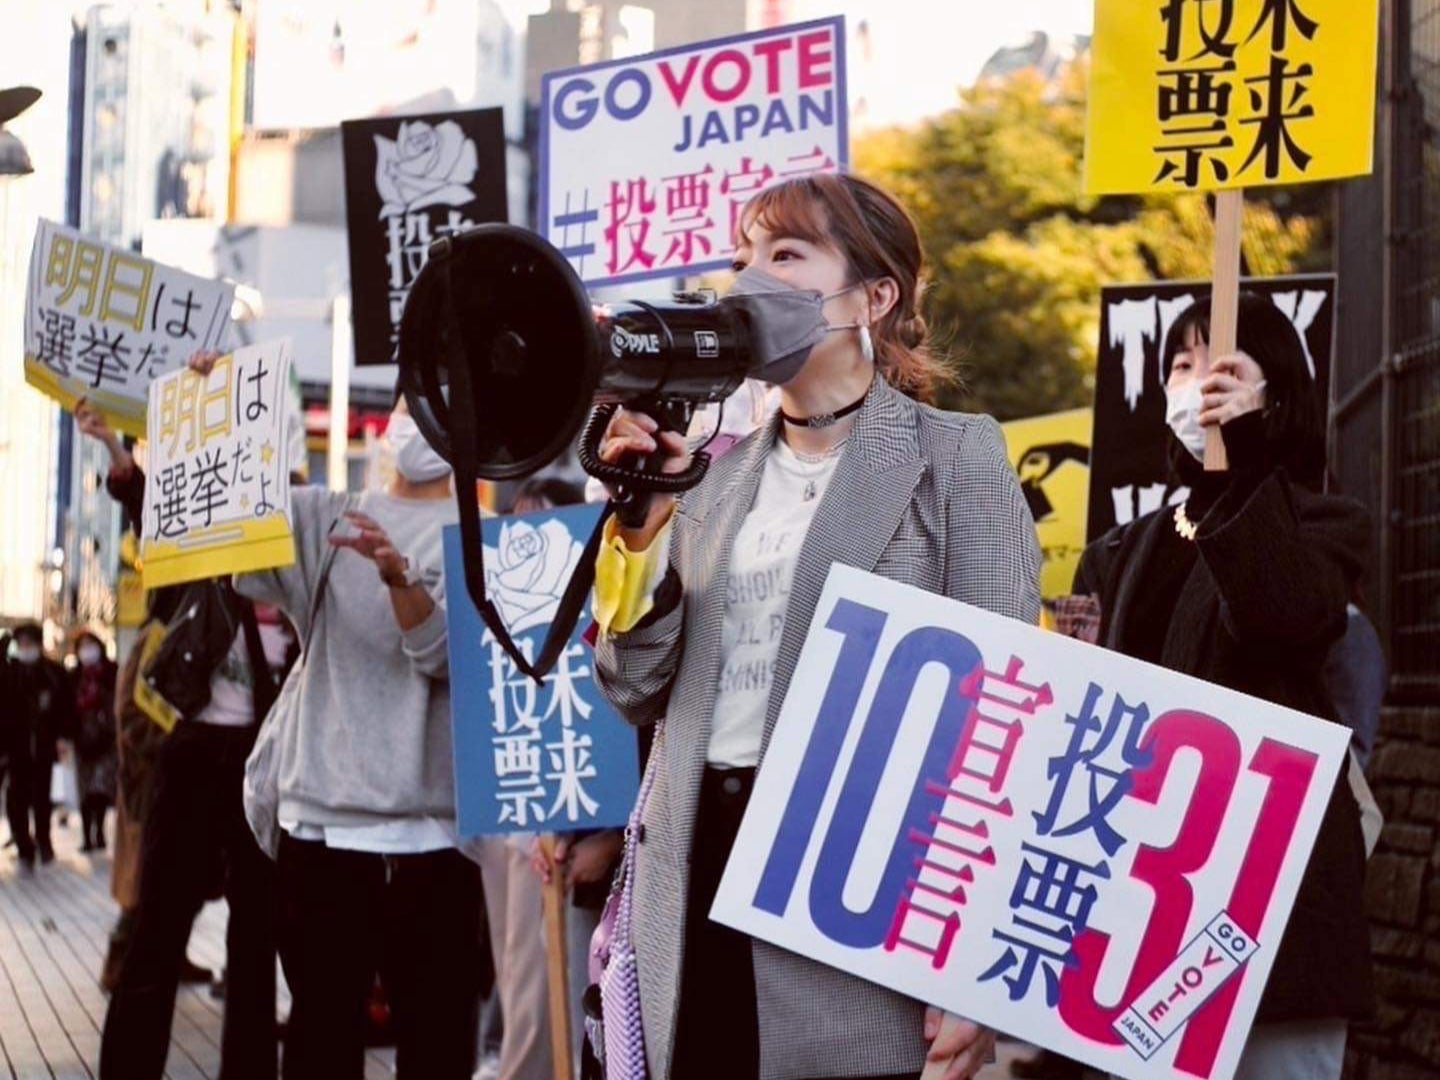 Asako Tsuji launched Go Vote Japan to encourage conversations